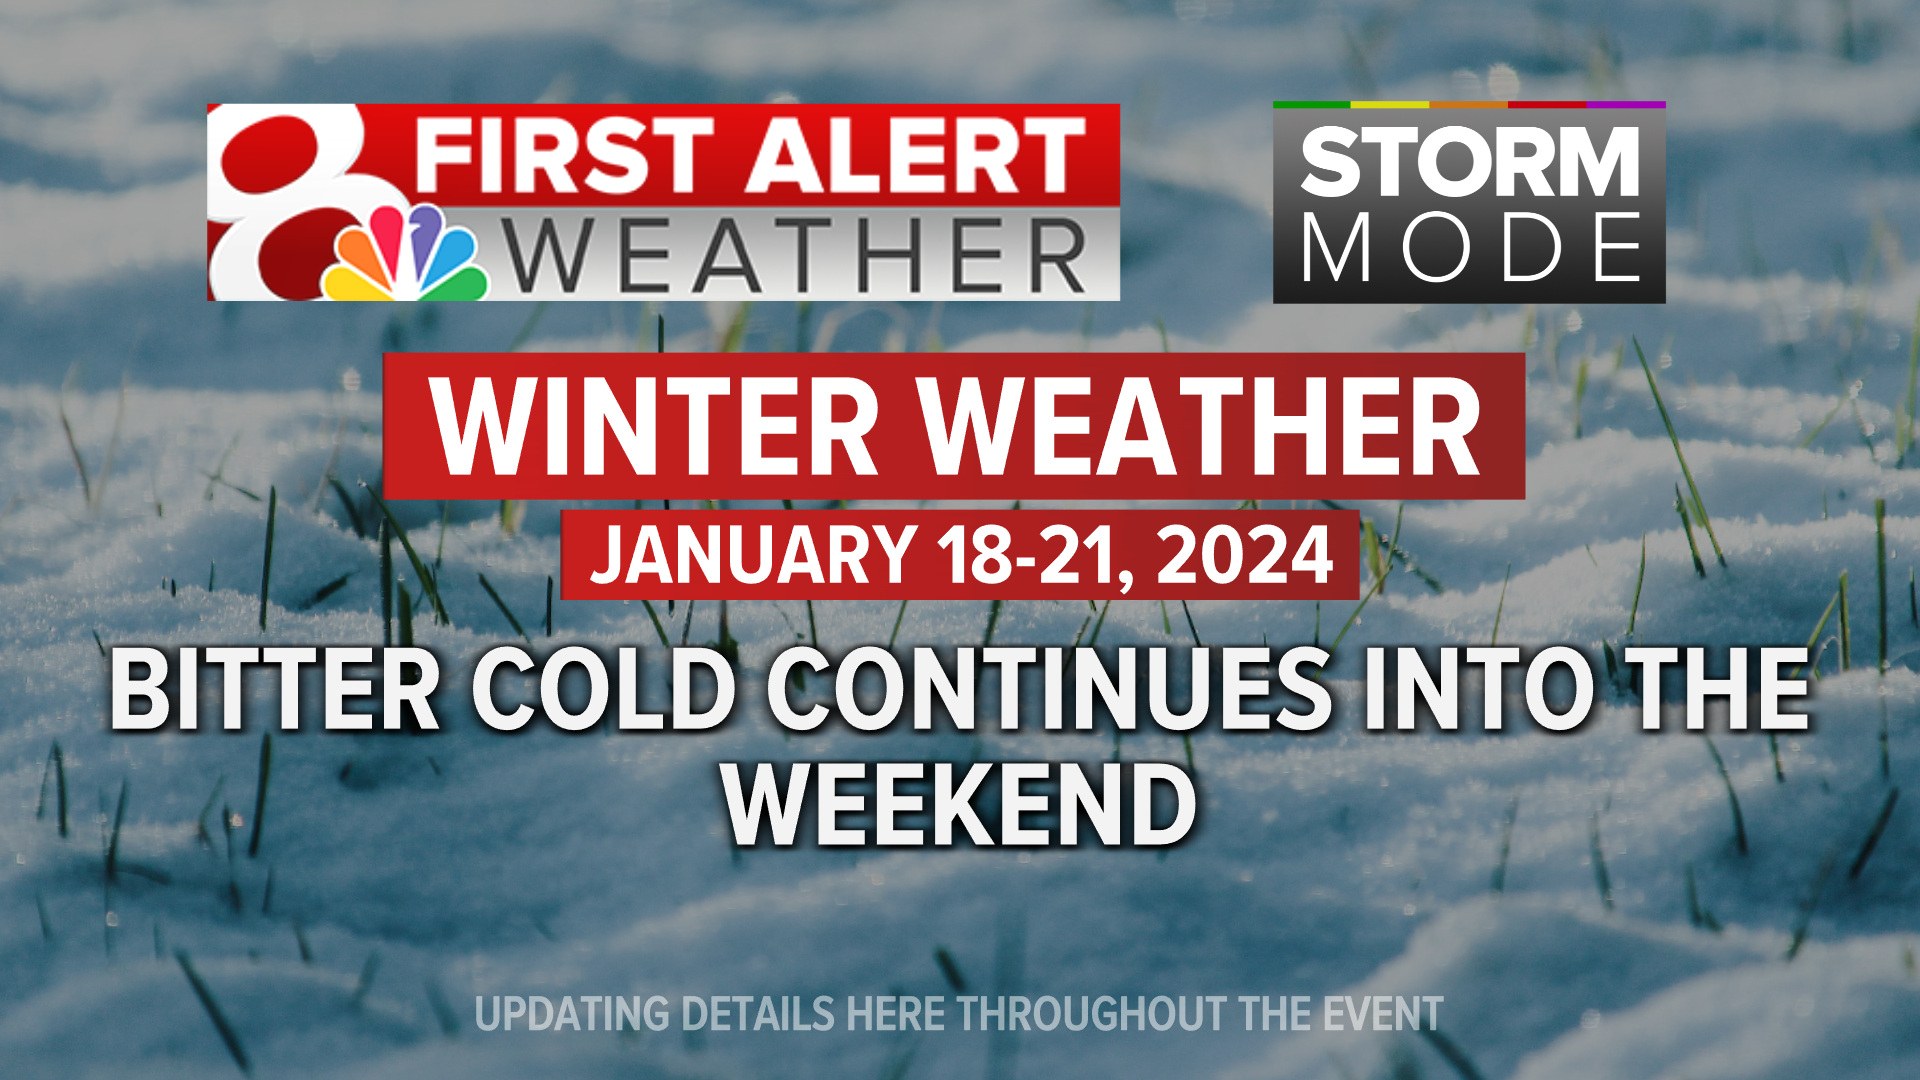 Columbia, Missouri weather forecast covers snow, winter storm warning